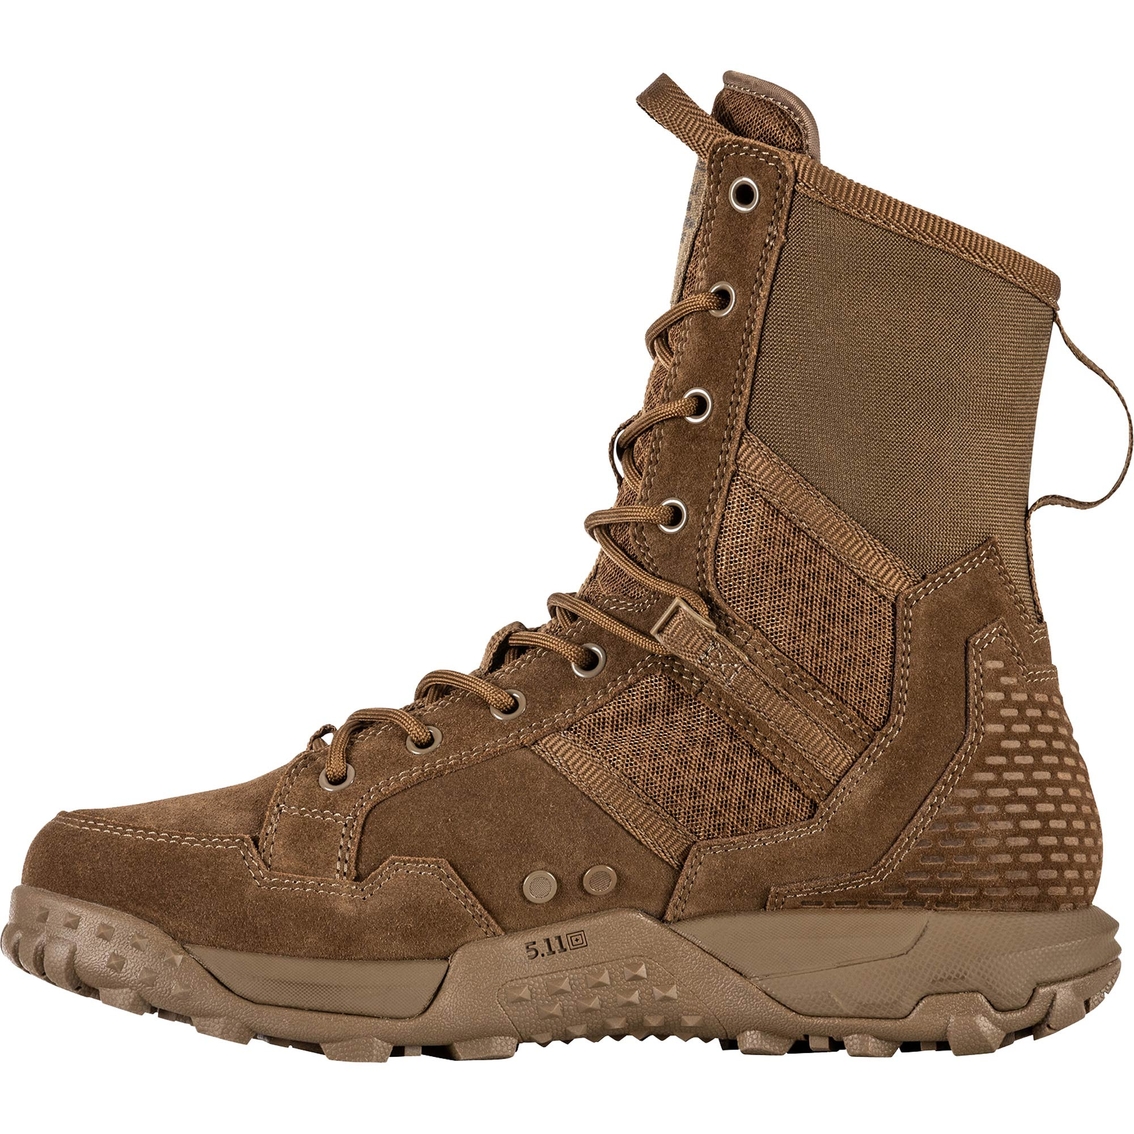 5.11 Men's A/T 8 in. Boots - Image 2 of 5